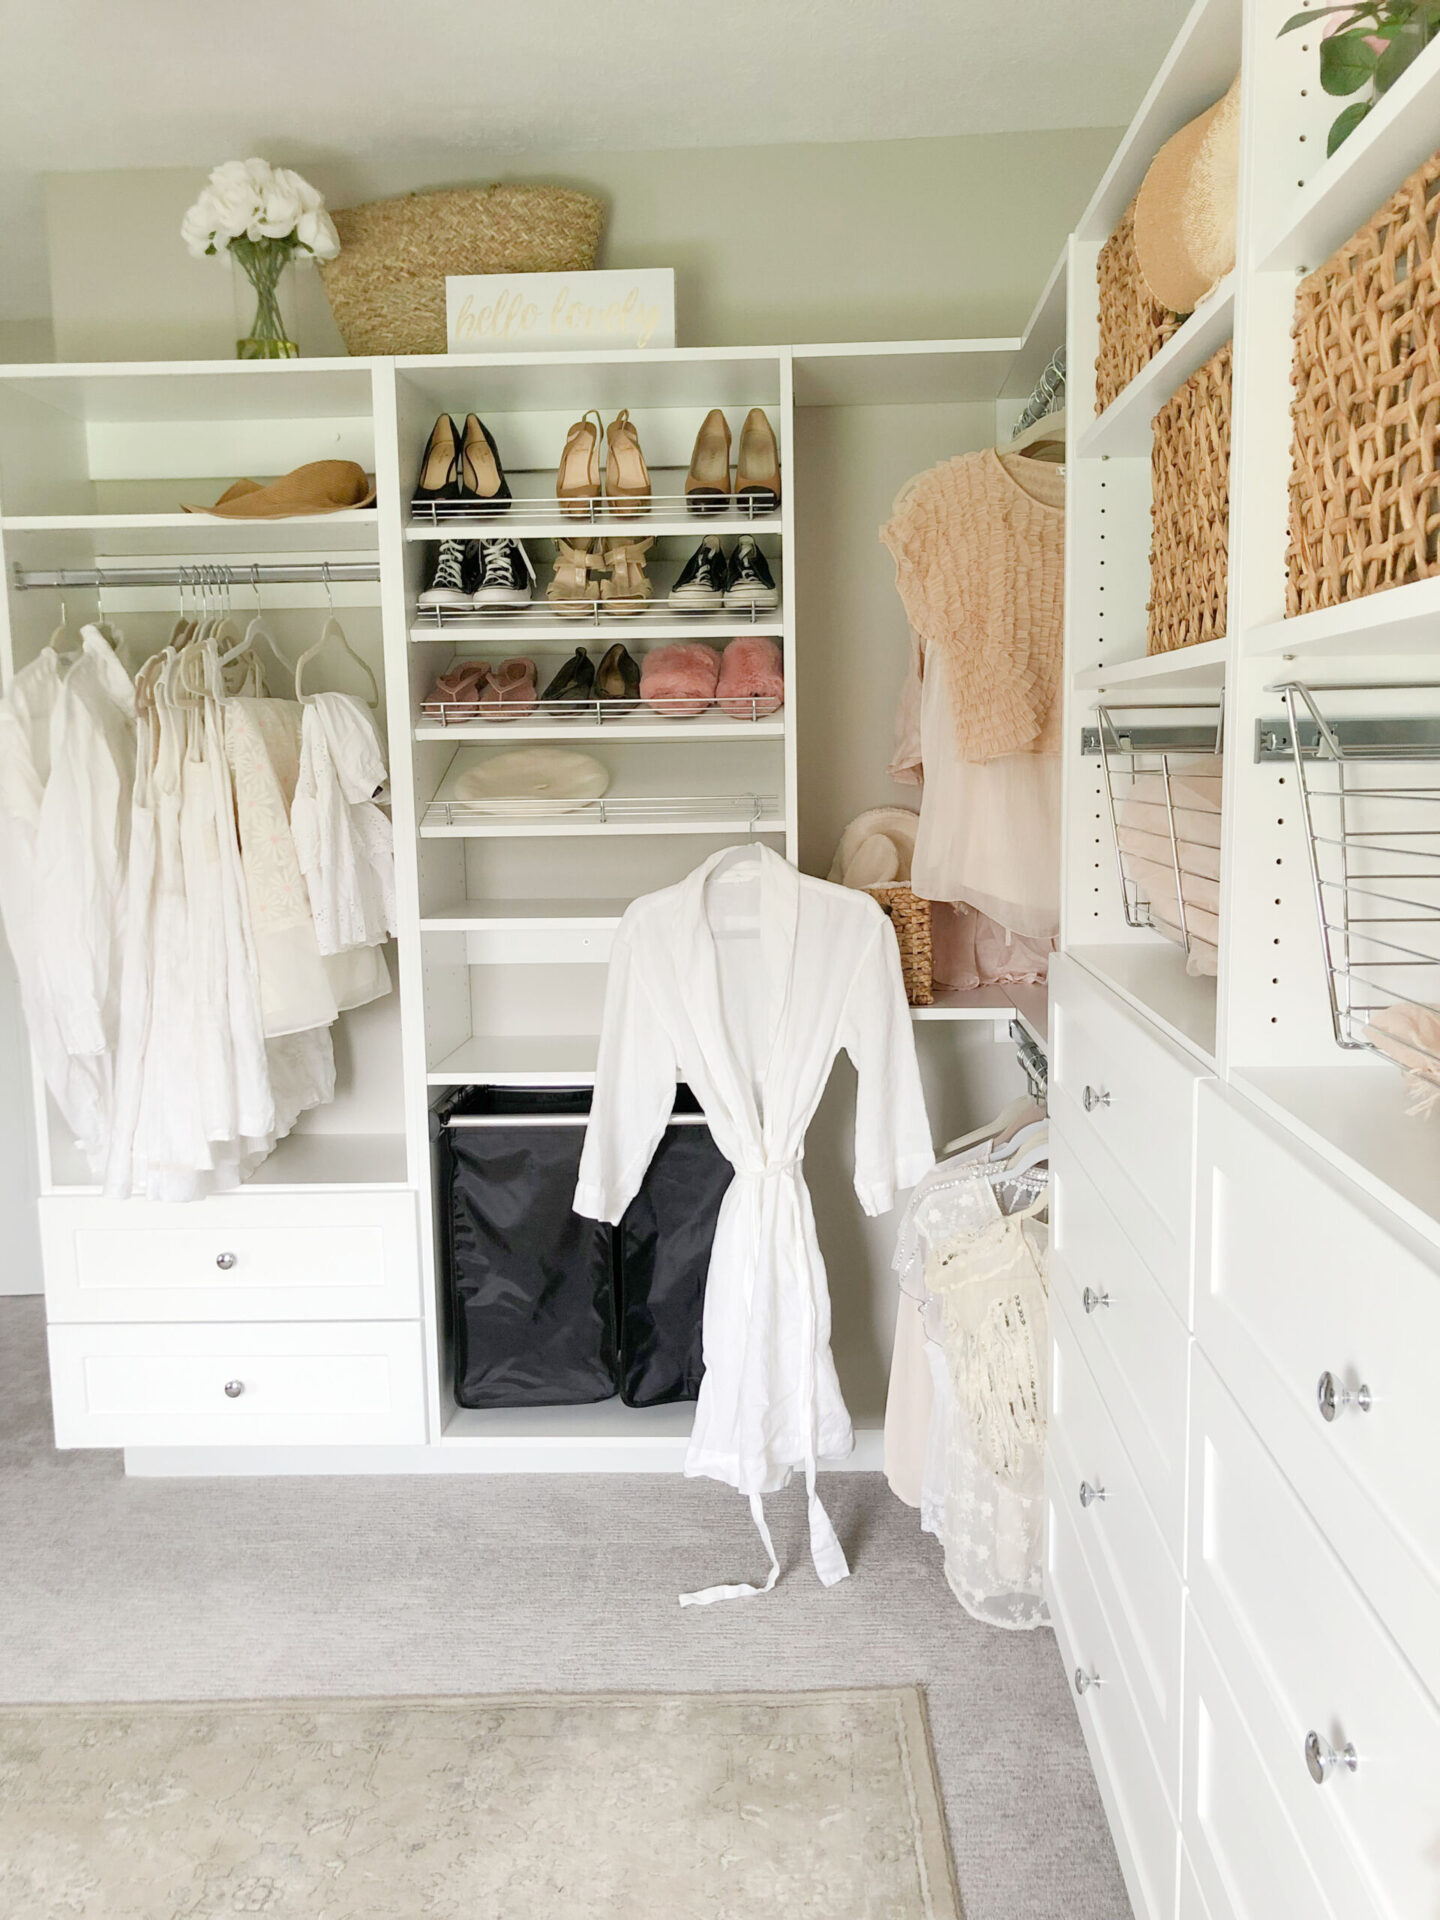 Slanted shoe shelves, hamper pull out drawer, and chrome pull out bins make this DIY custom closet system perfect for my needs - Hello Lovely Studio. #closetupgrade #diycloset #closetaccessories